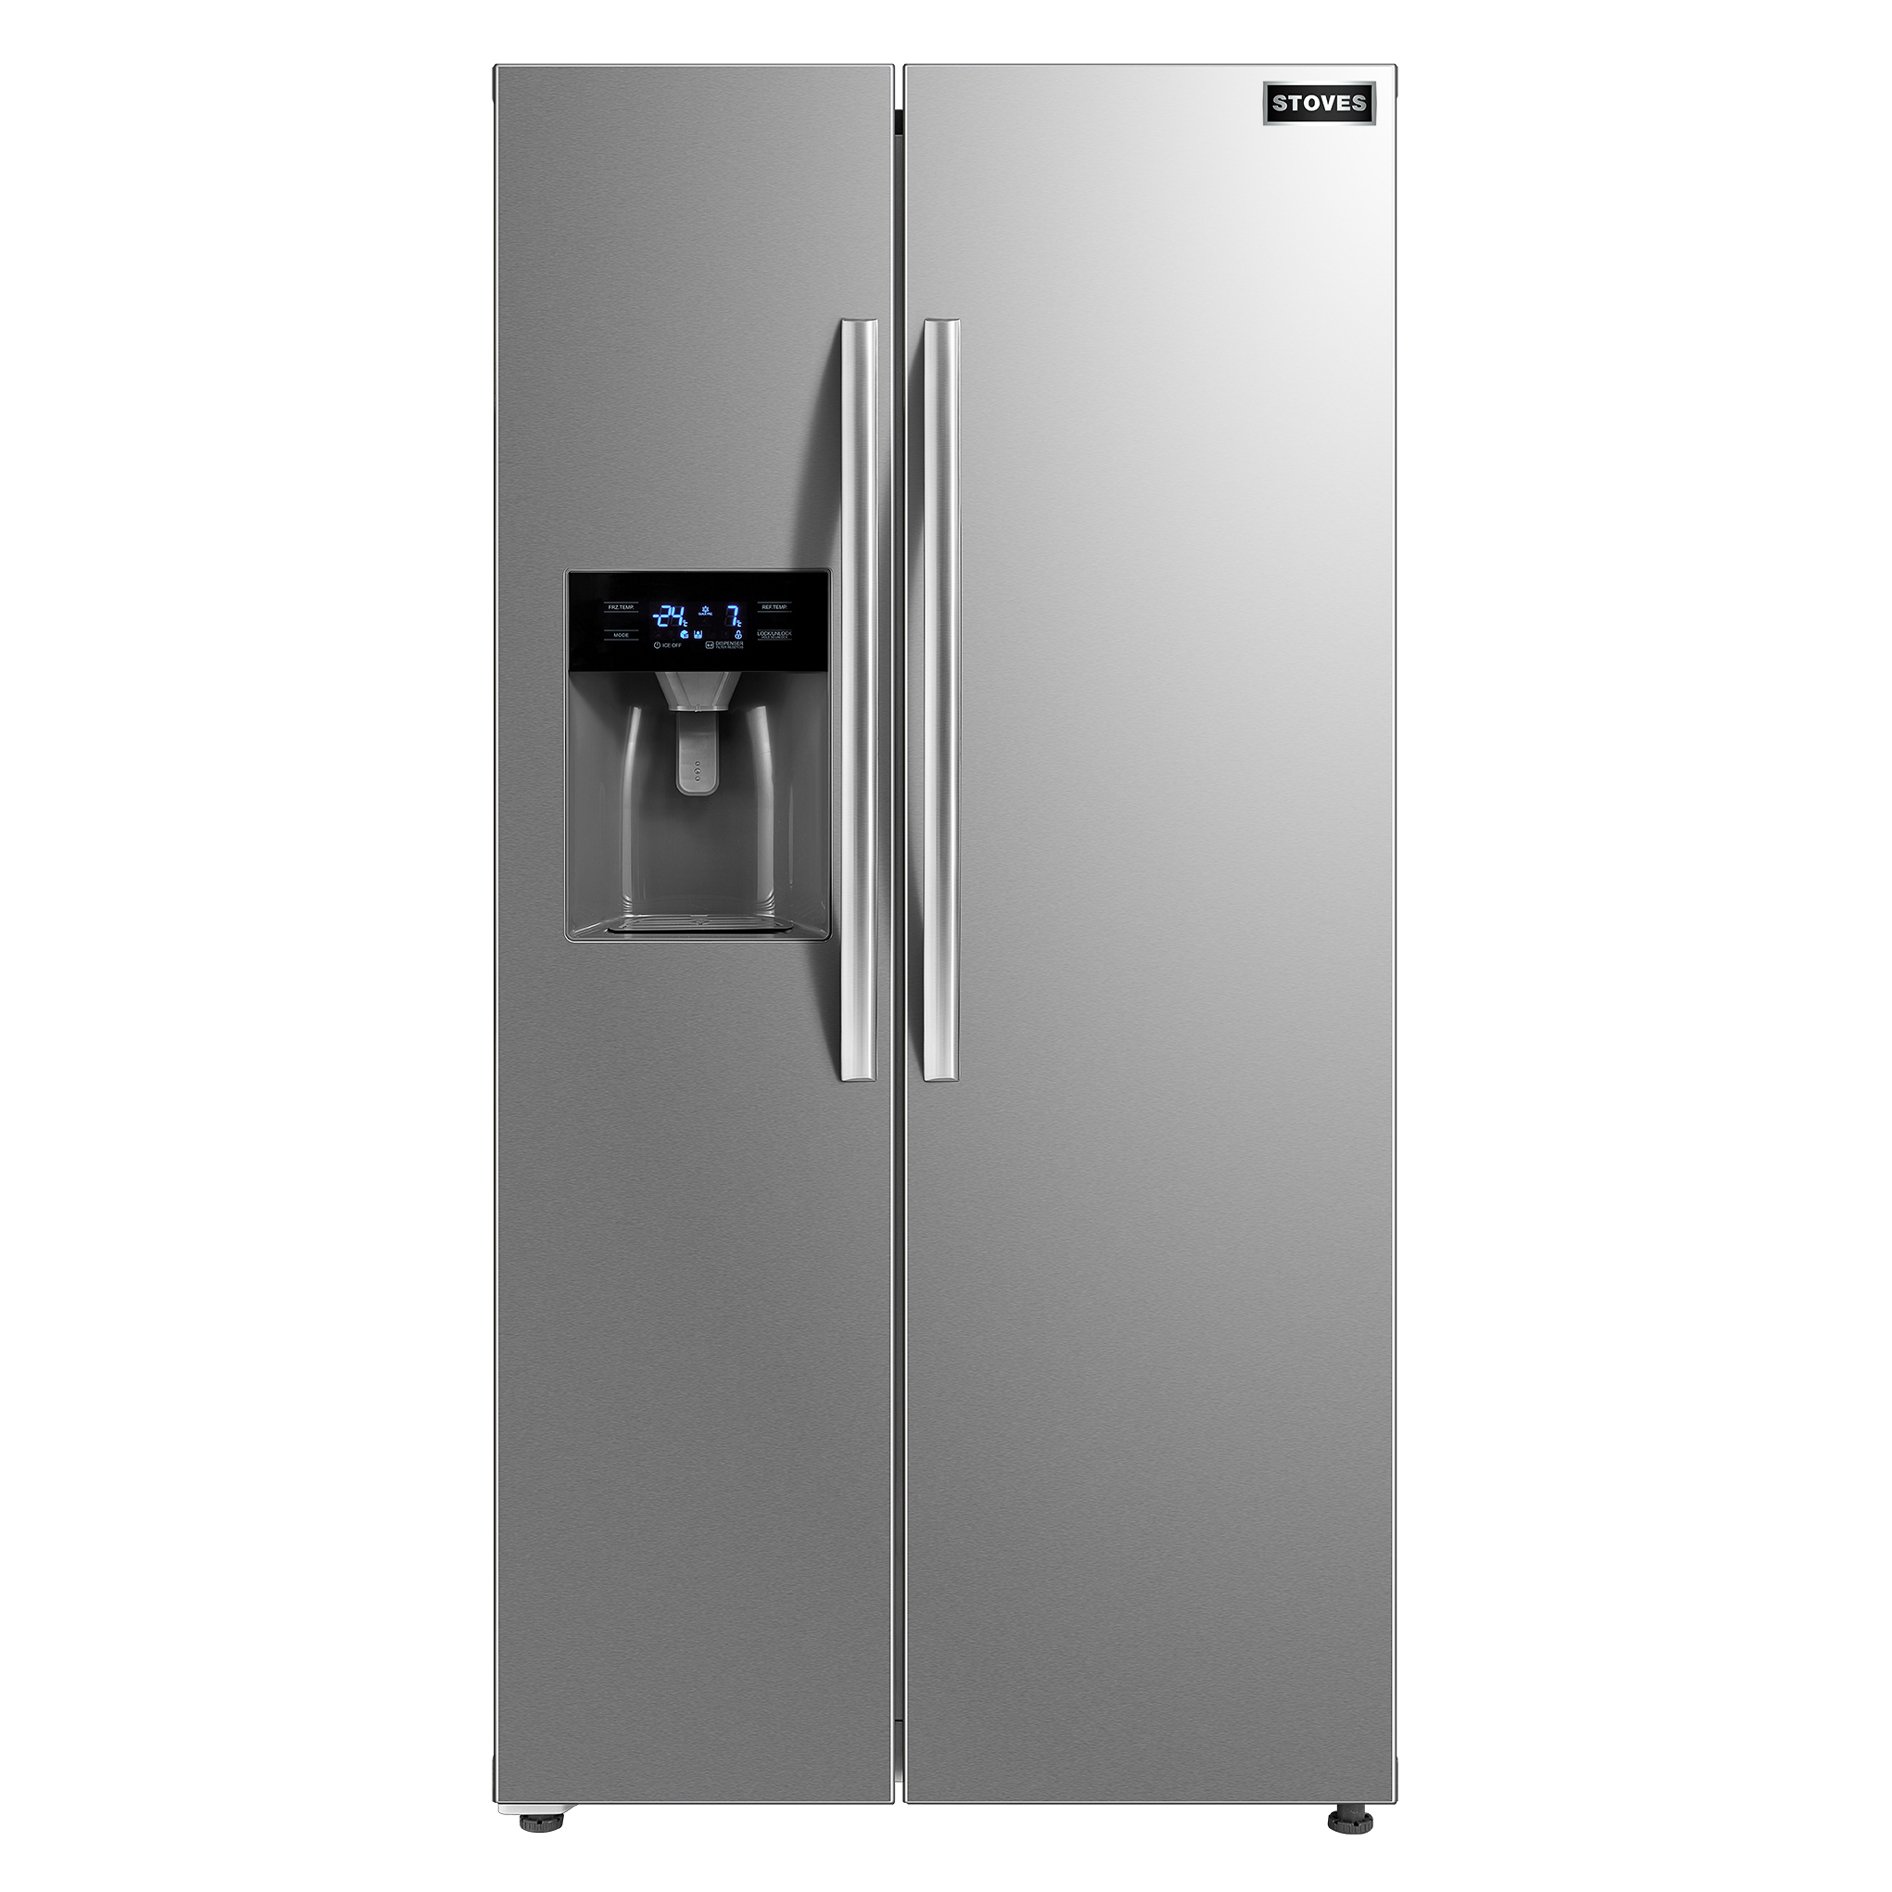 Fully Plumbed Side-By-Side With Ice Maker & Water Dispenser, 349L gross fridge & 219L gross freezer capacity. Features include Frost Free Operation, Dual Control Thermostat, Electronic Touch Controls & Digital Temperature Displays. 